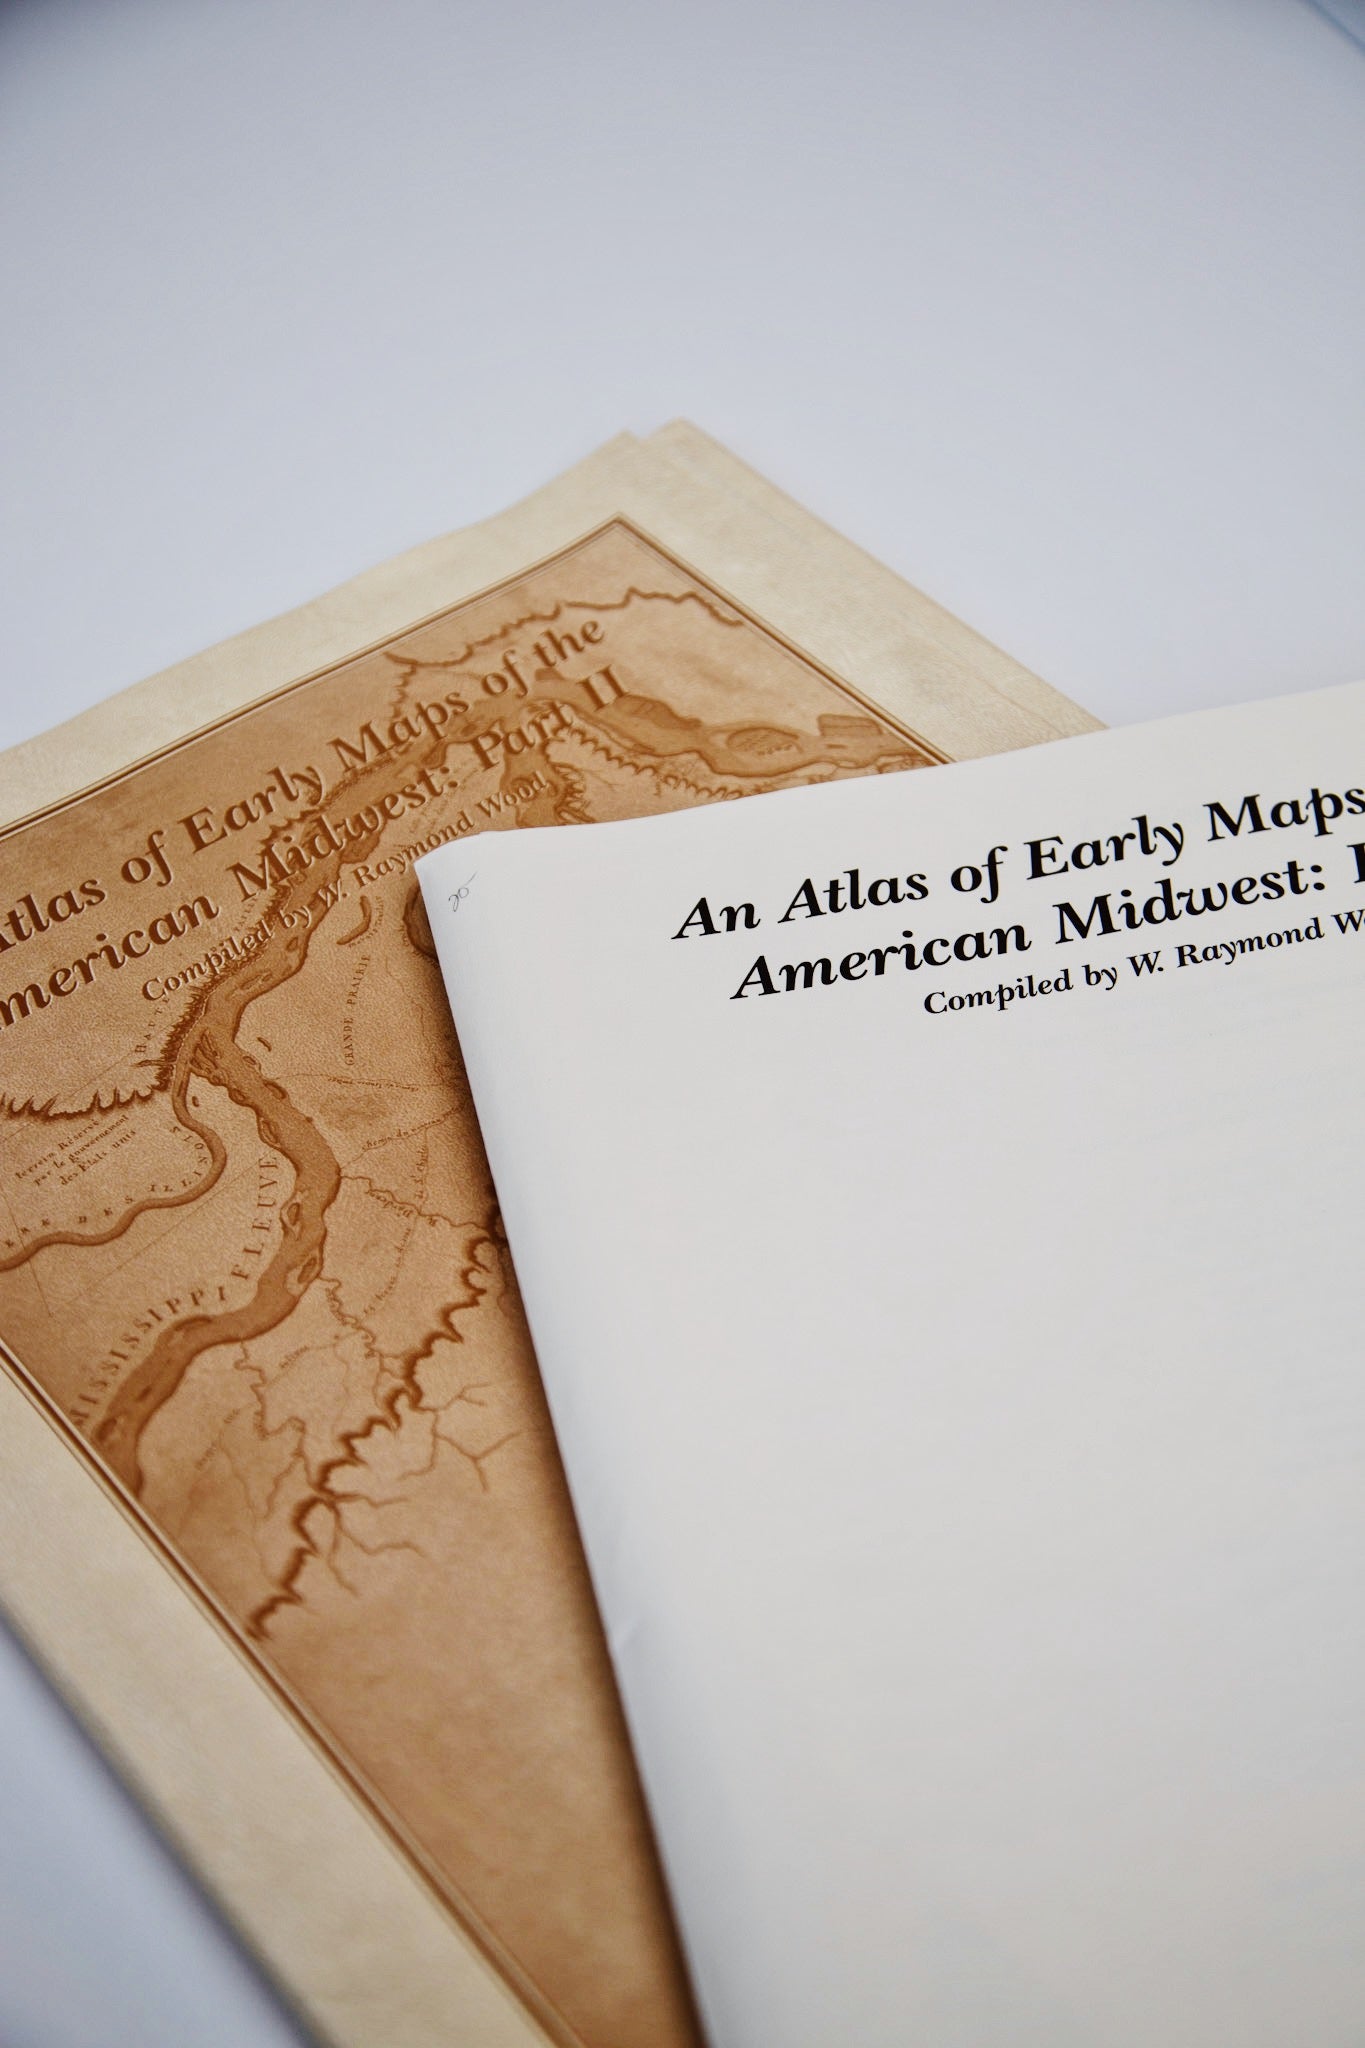 The front cover and inside map cover of “An Atlas of Early Maps of the American Midwest: Part II”